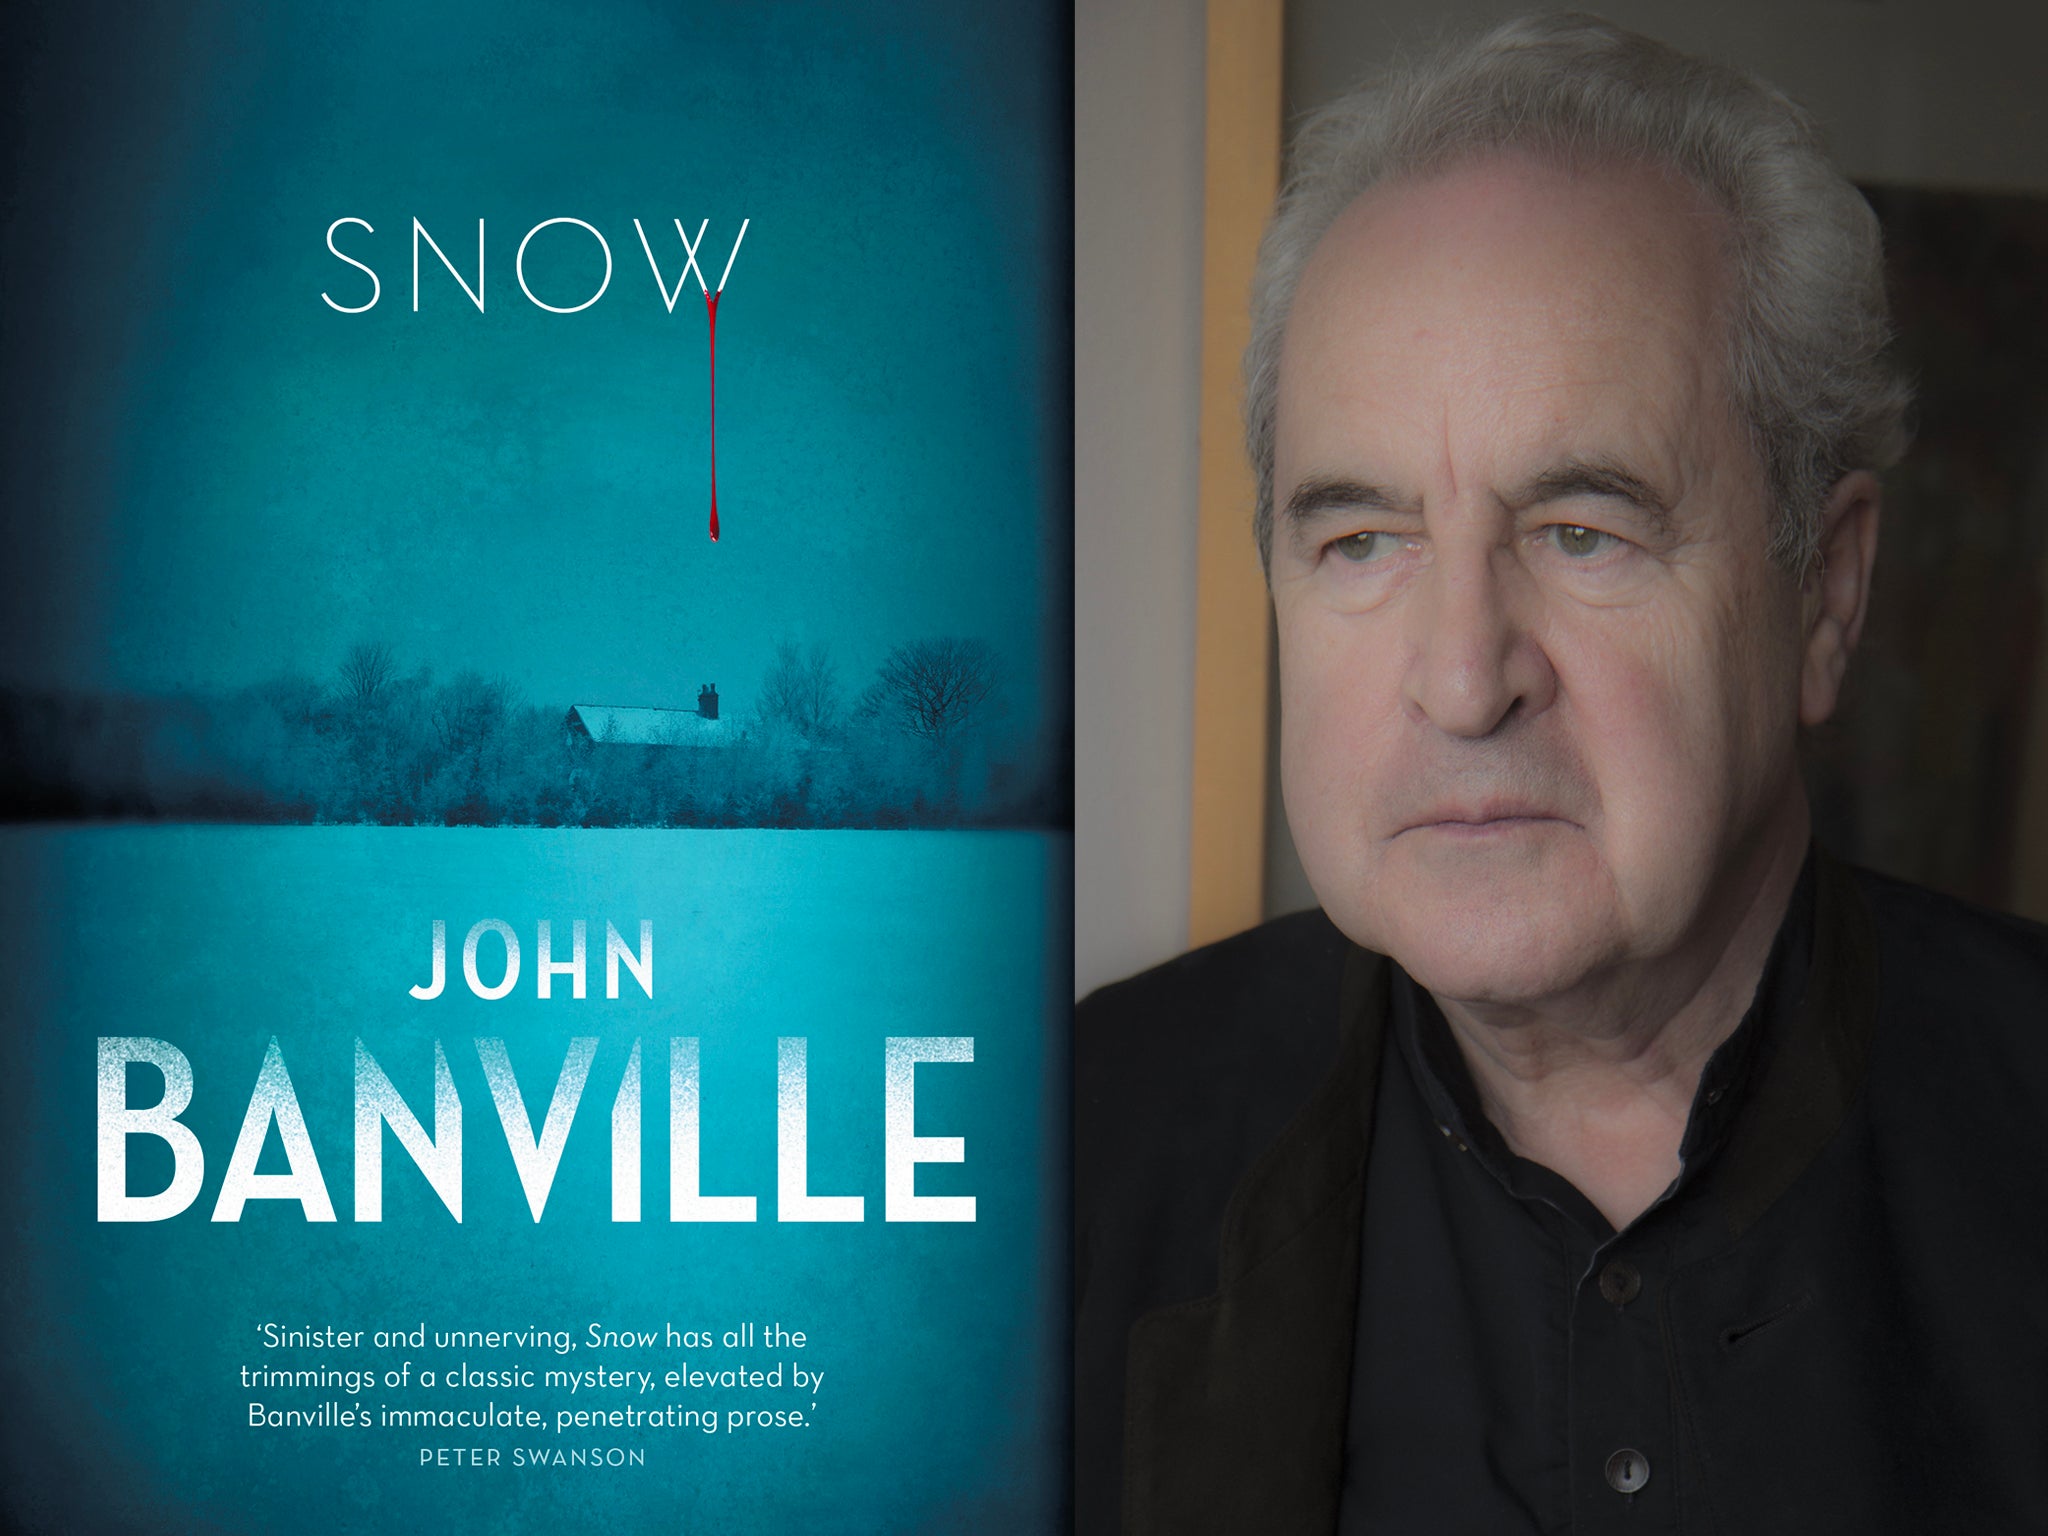 As well as a gripping thriller, John Banville’蝉 ‘Snow' is a moving portrait of the pain and suffering of victims of abuse